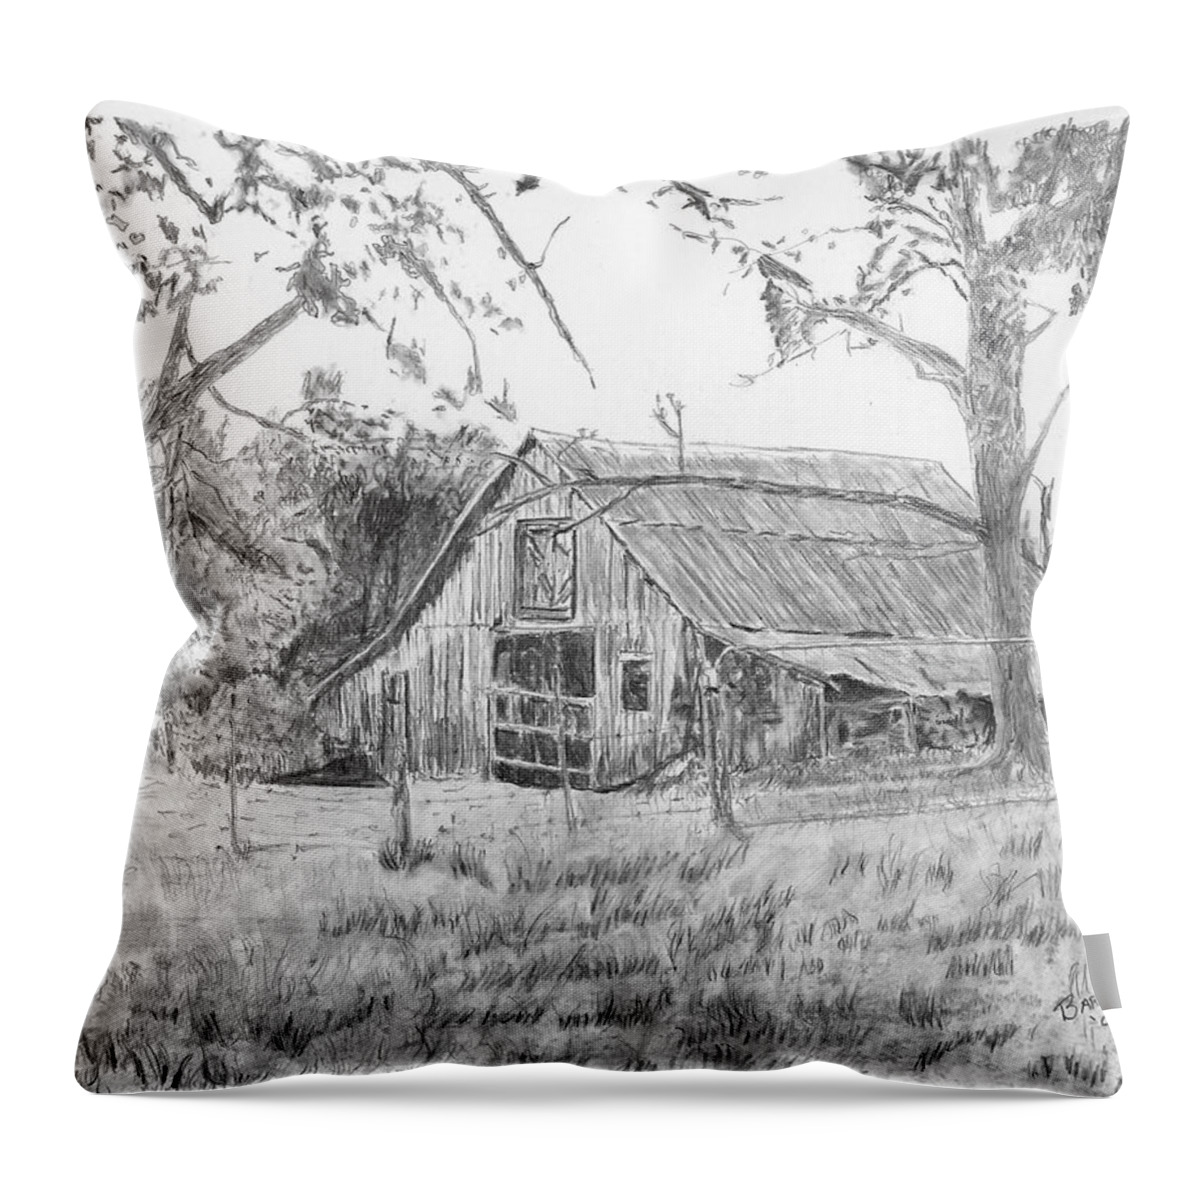 Old Barn Throw Pillow featuring the drawing Old Barn 2 by Barry Jones